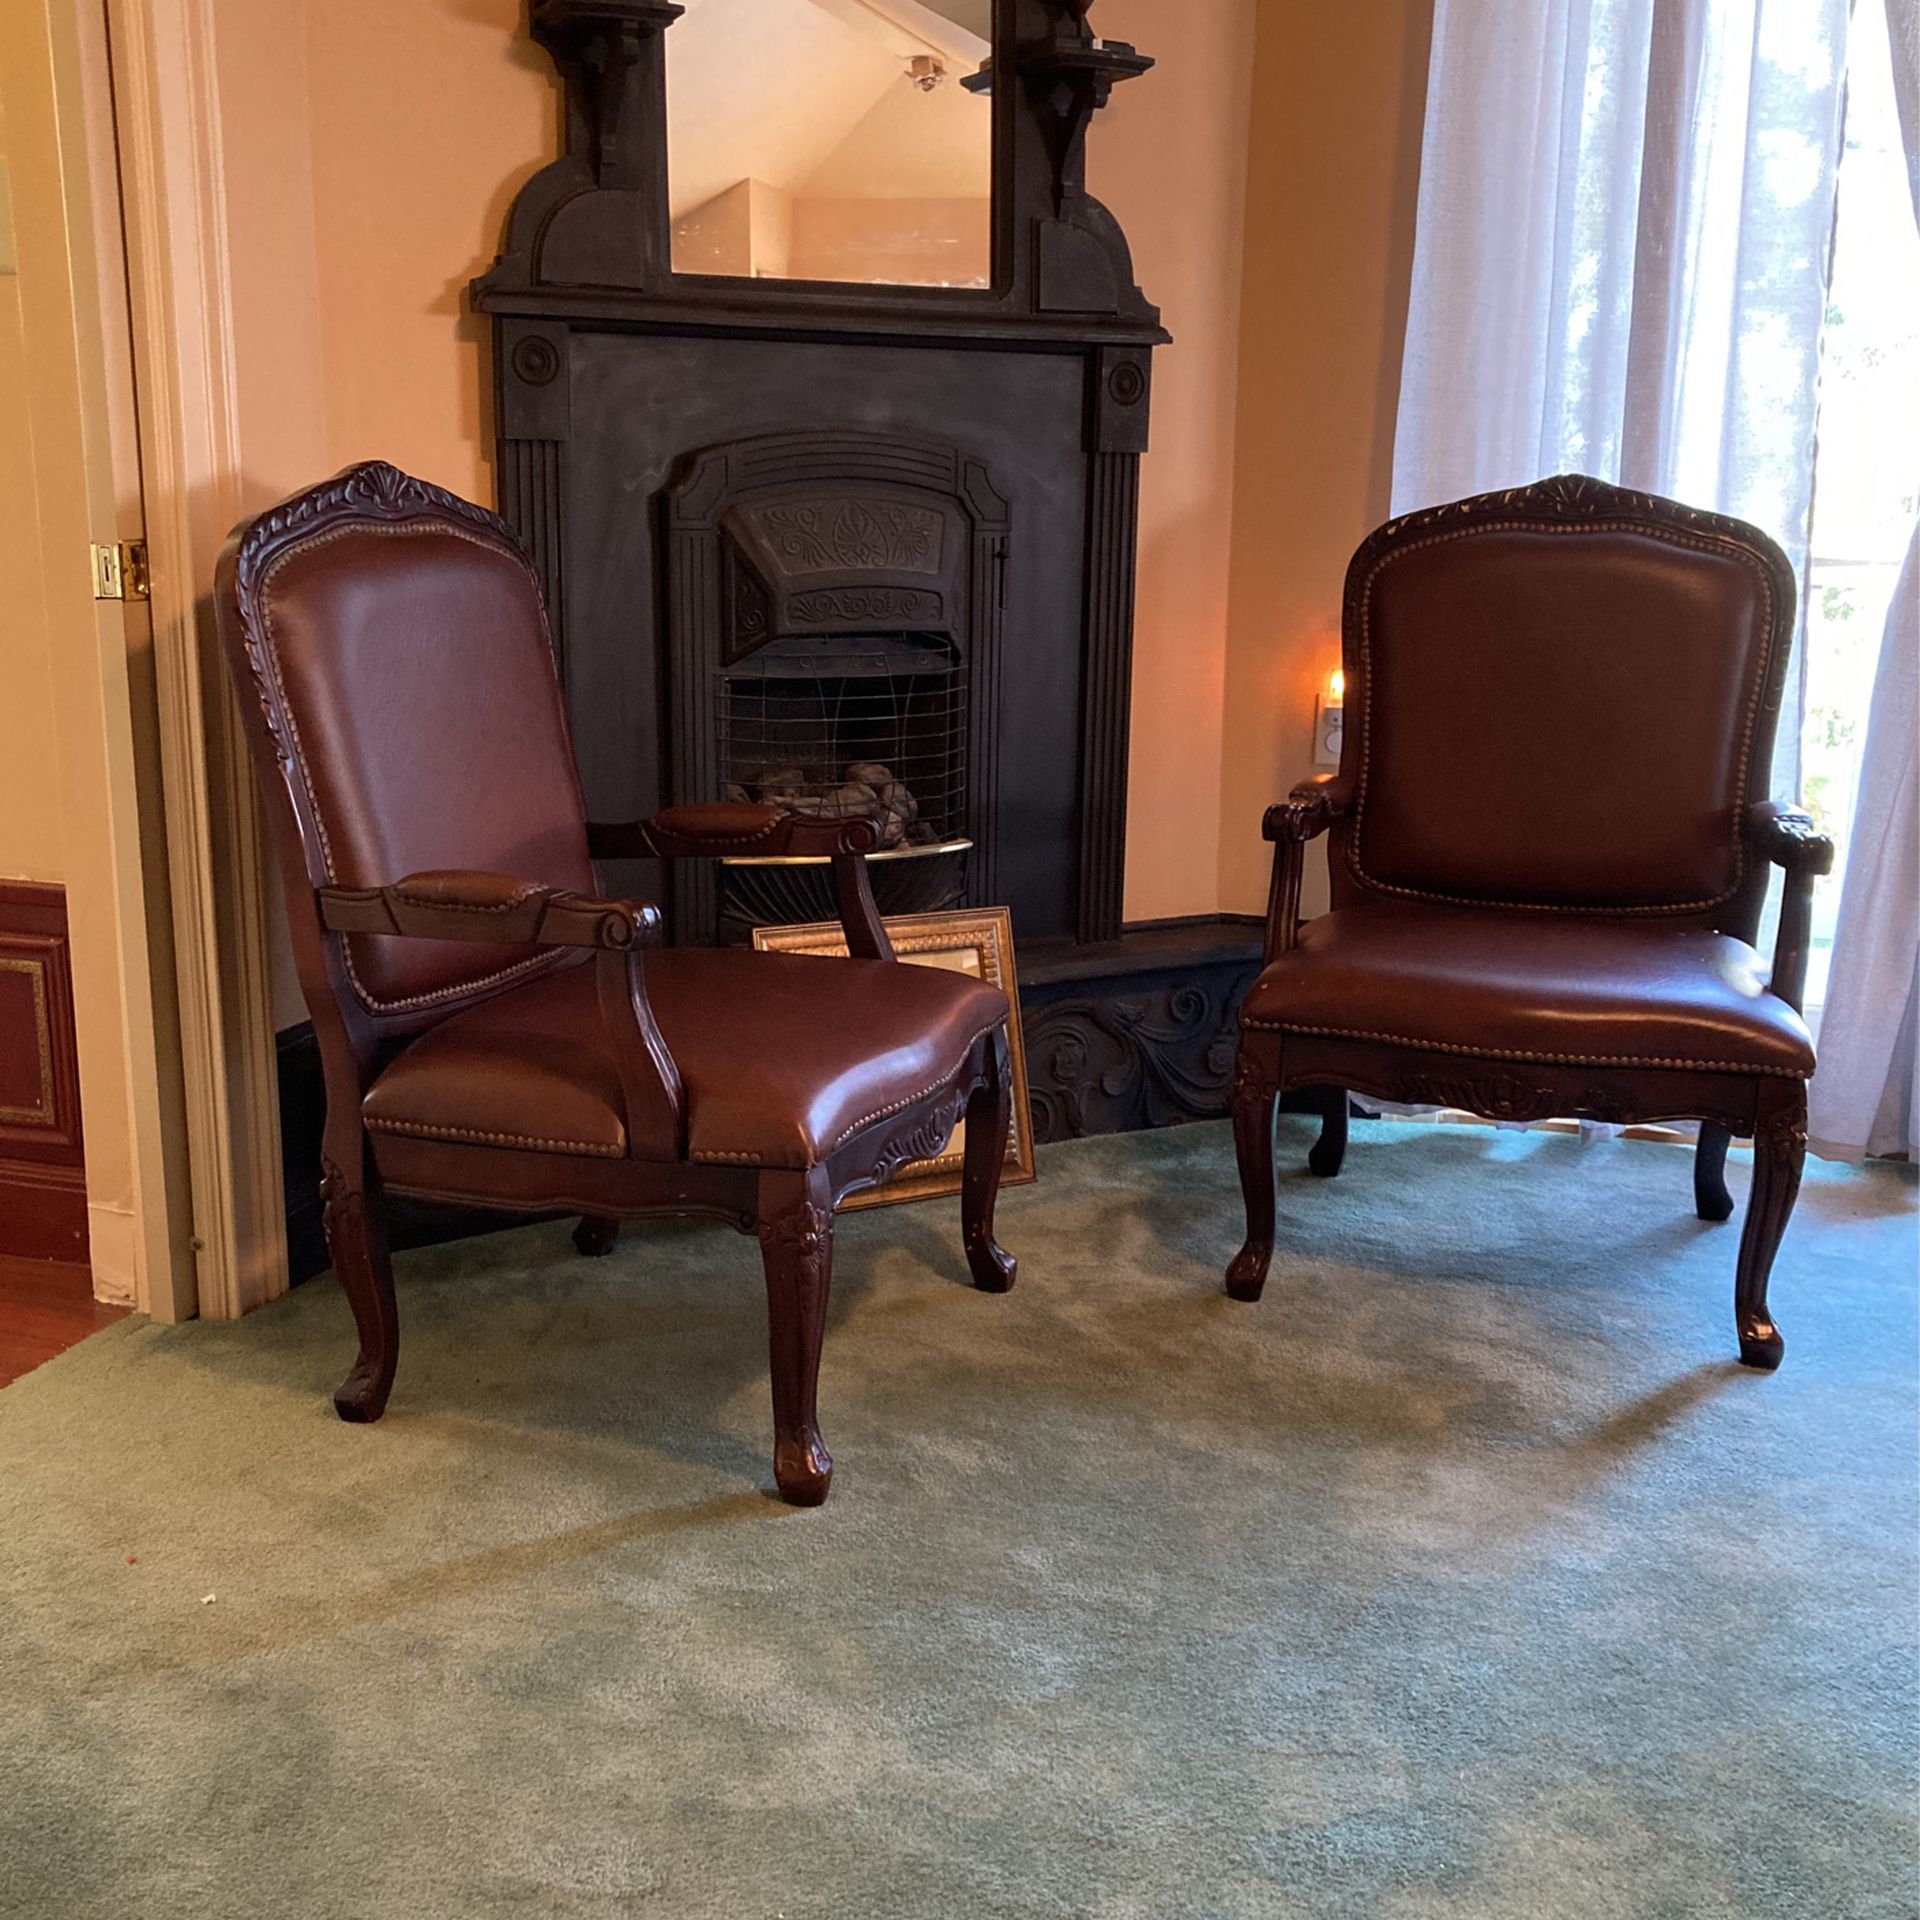 2 Antique  Chairs